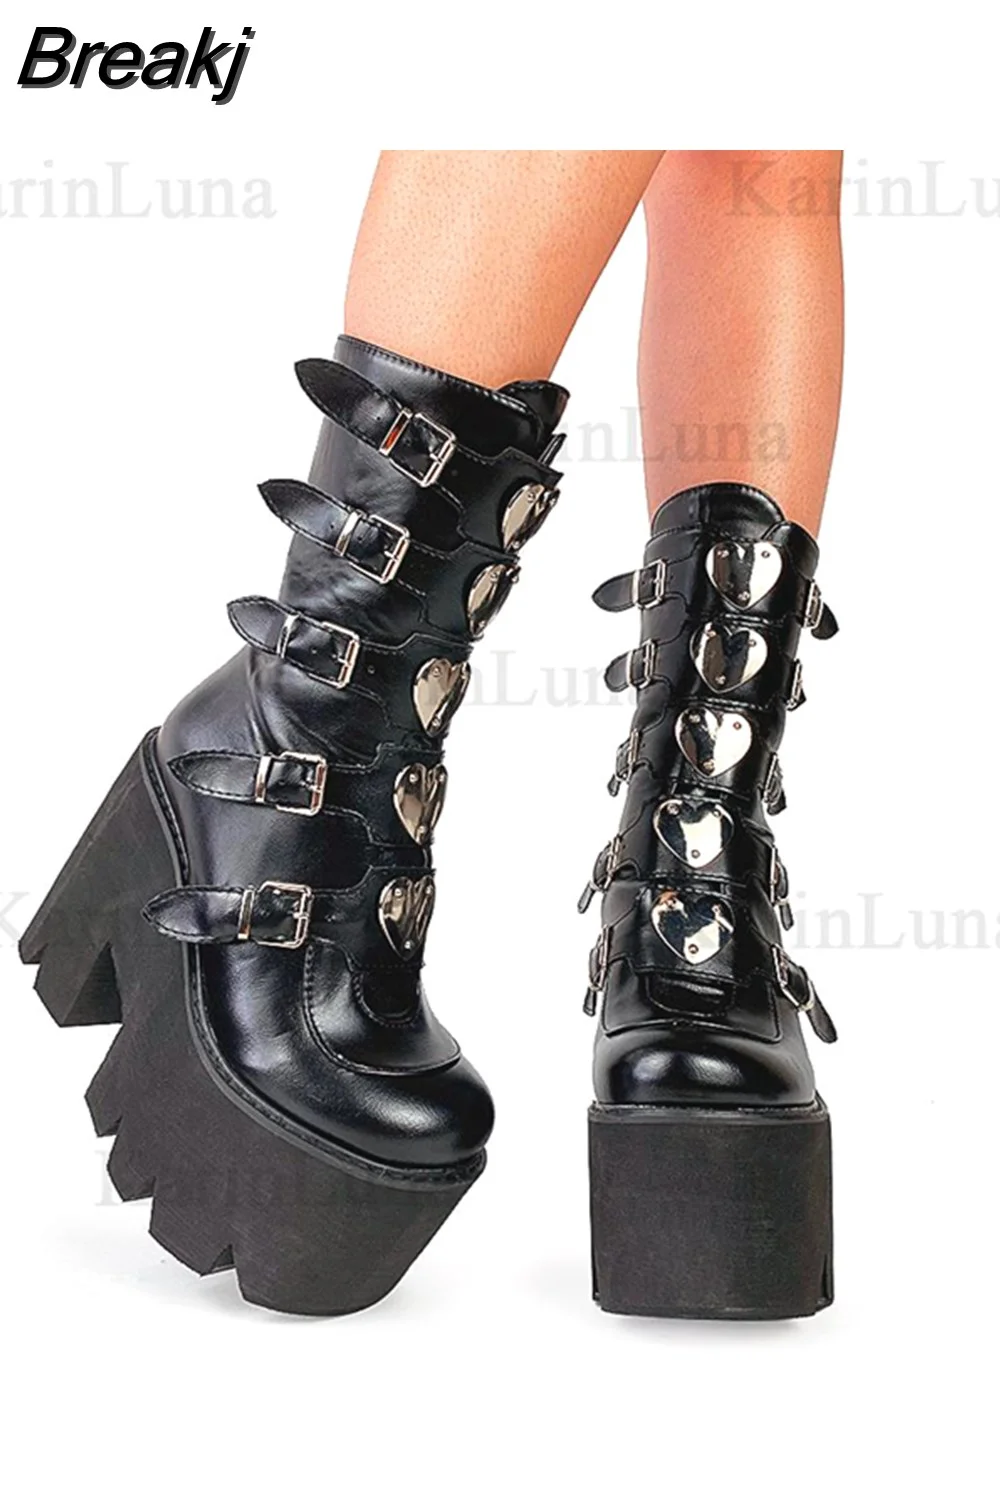 Breakj Design Gothic Boots INS Hot Great Quality Fashion Cool Motorcycle Boots Big Size 43 Wedges Heart Platform Mid-Calf Boots